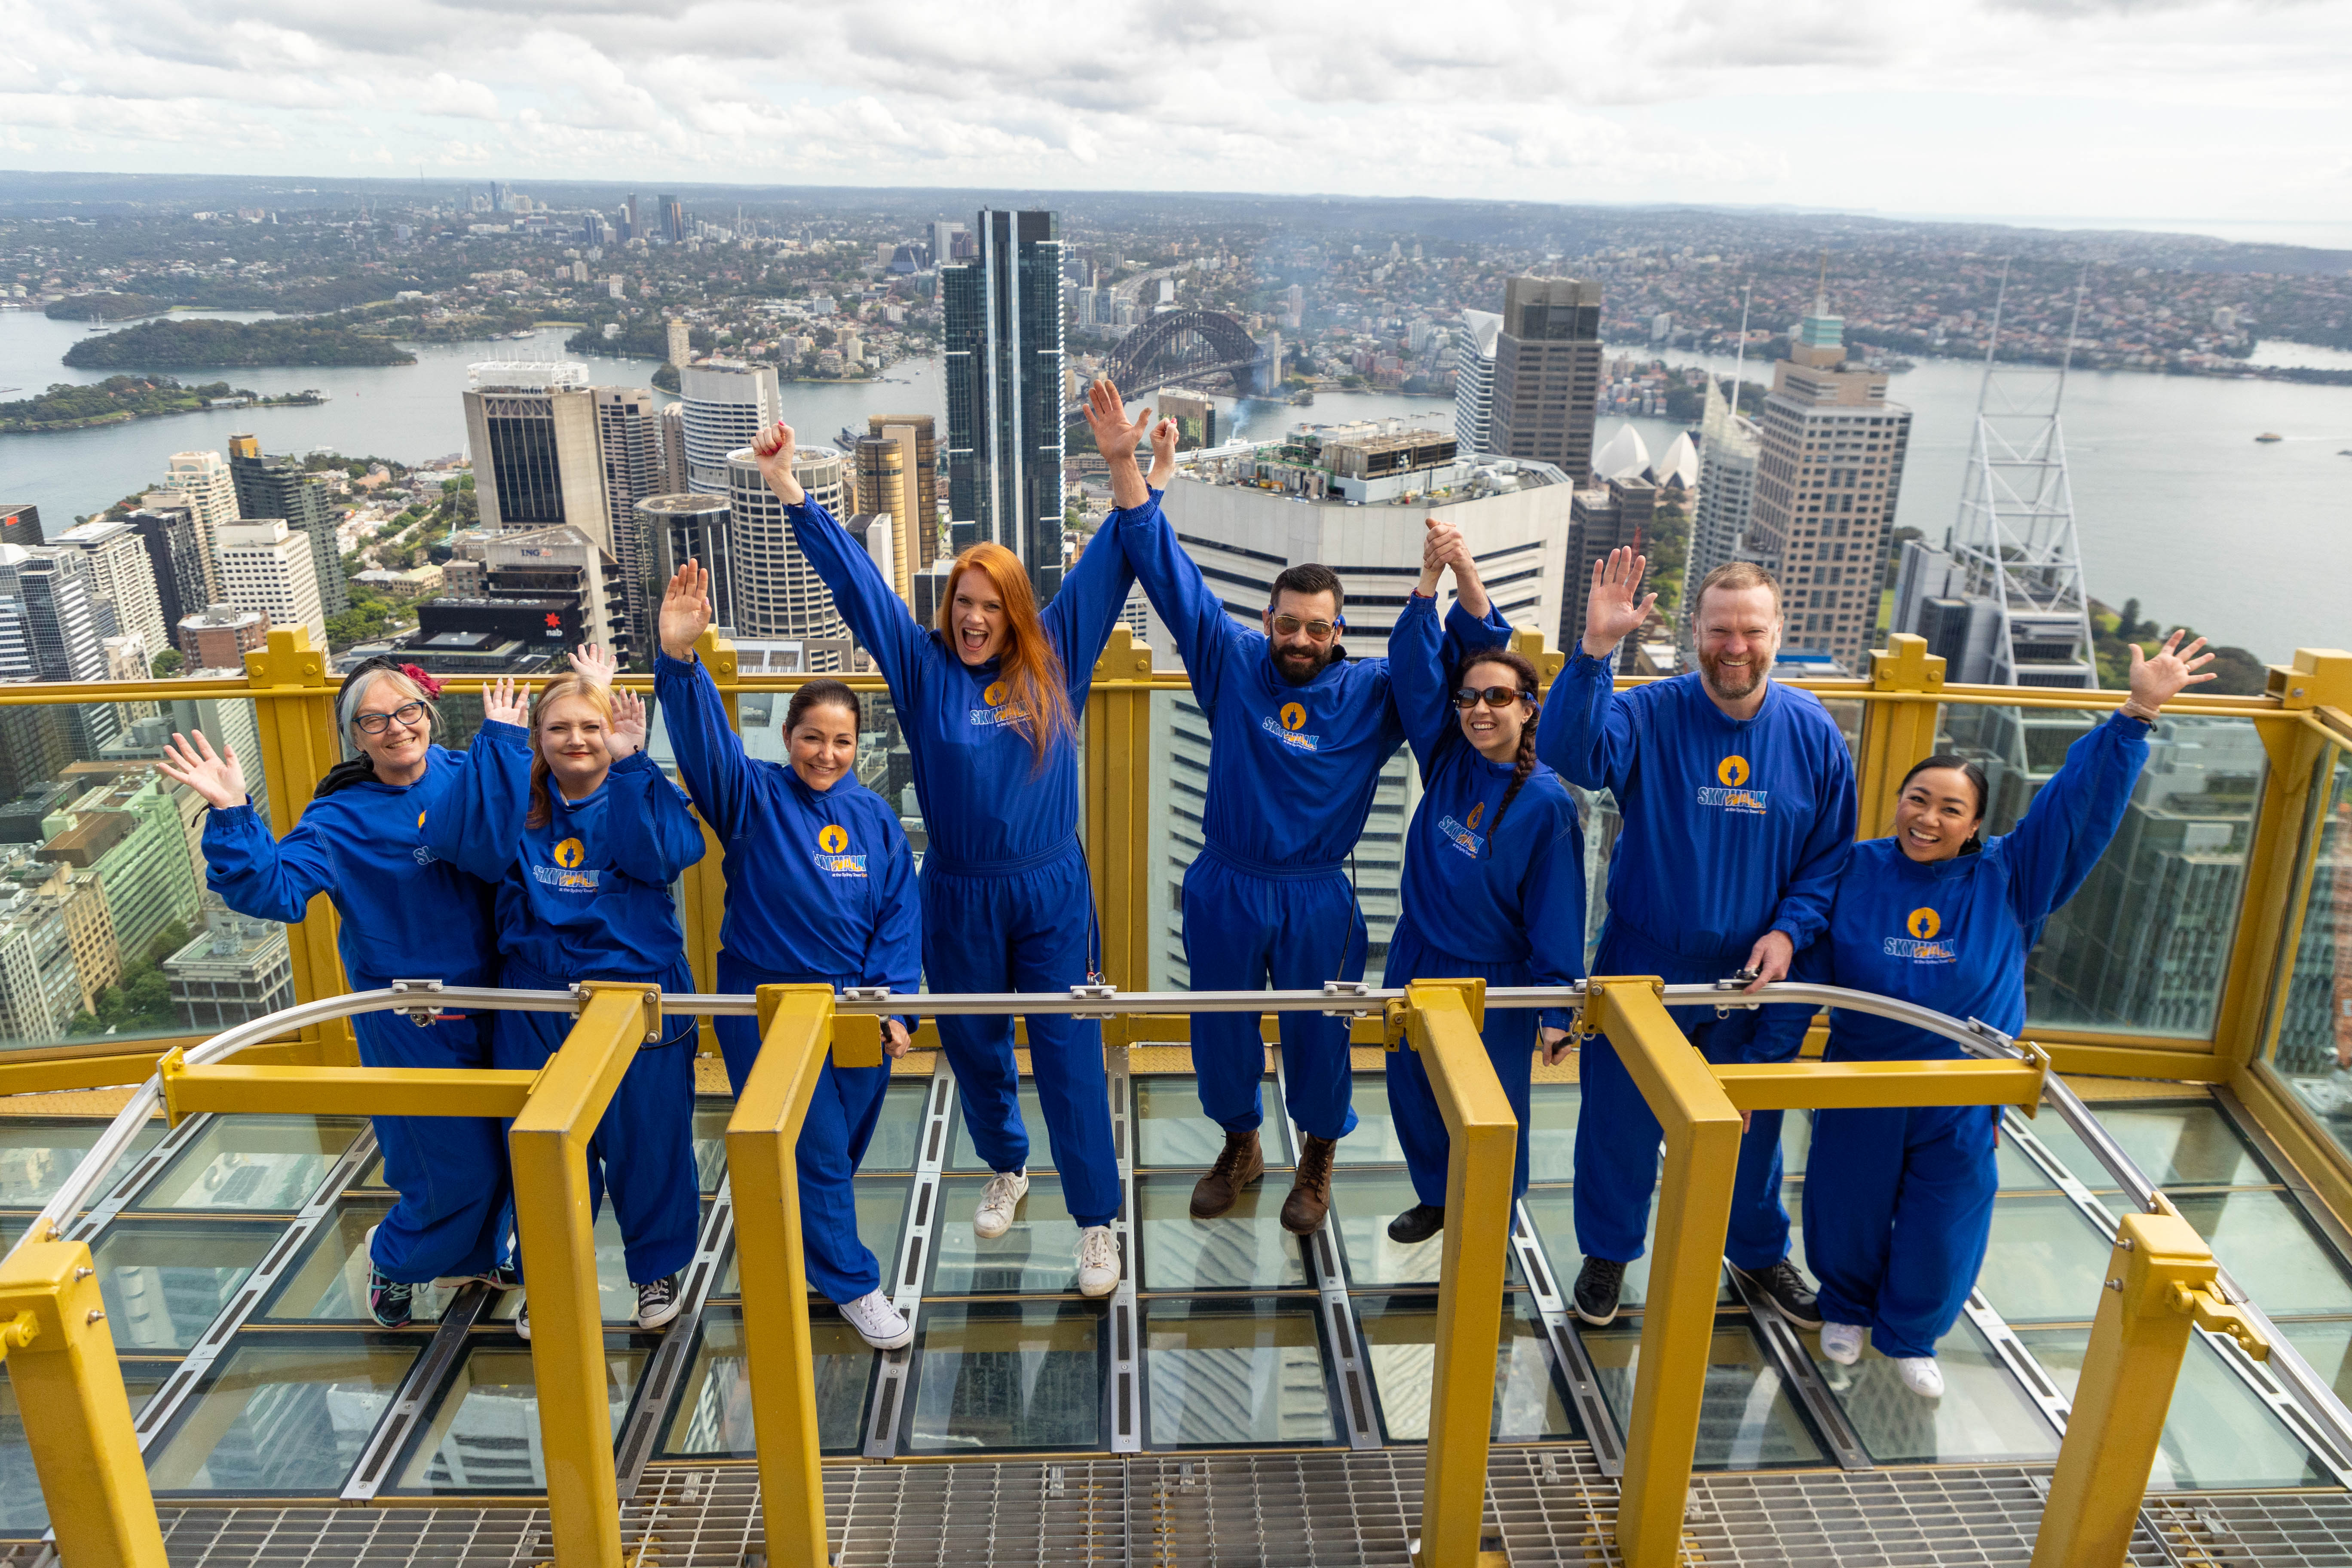 They Did It. Group Conquered SKYWALK At Sydney Tower Eye